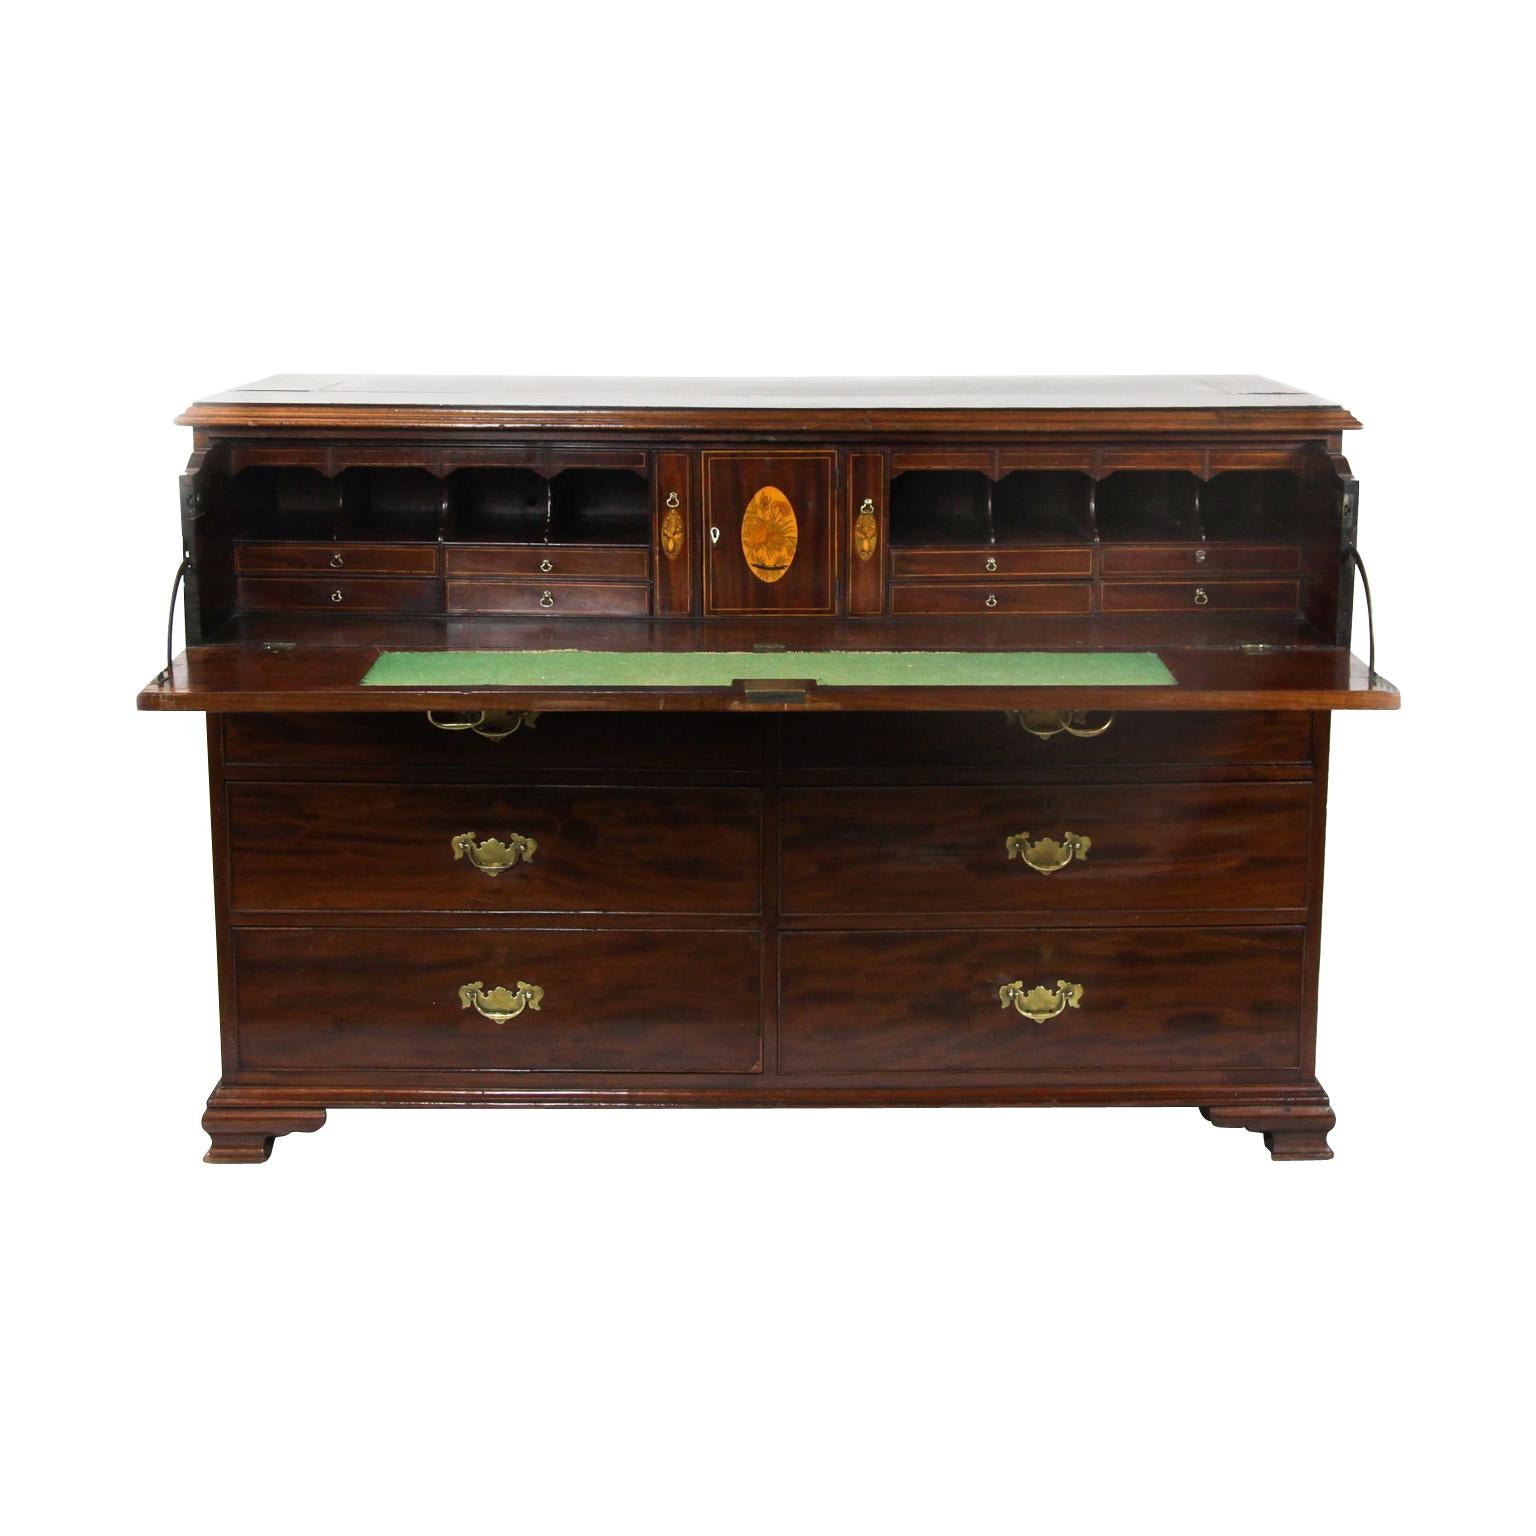 Early 19th Century English Fall Front Butler's Desk For Sale